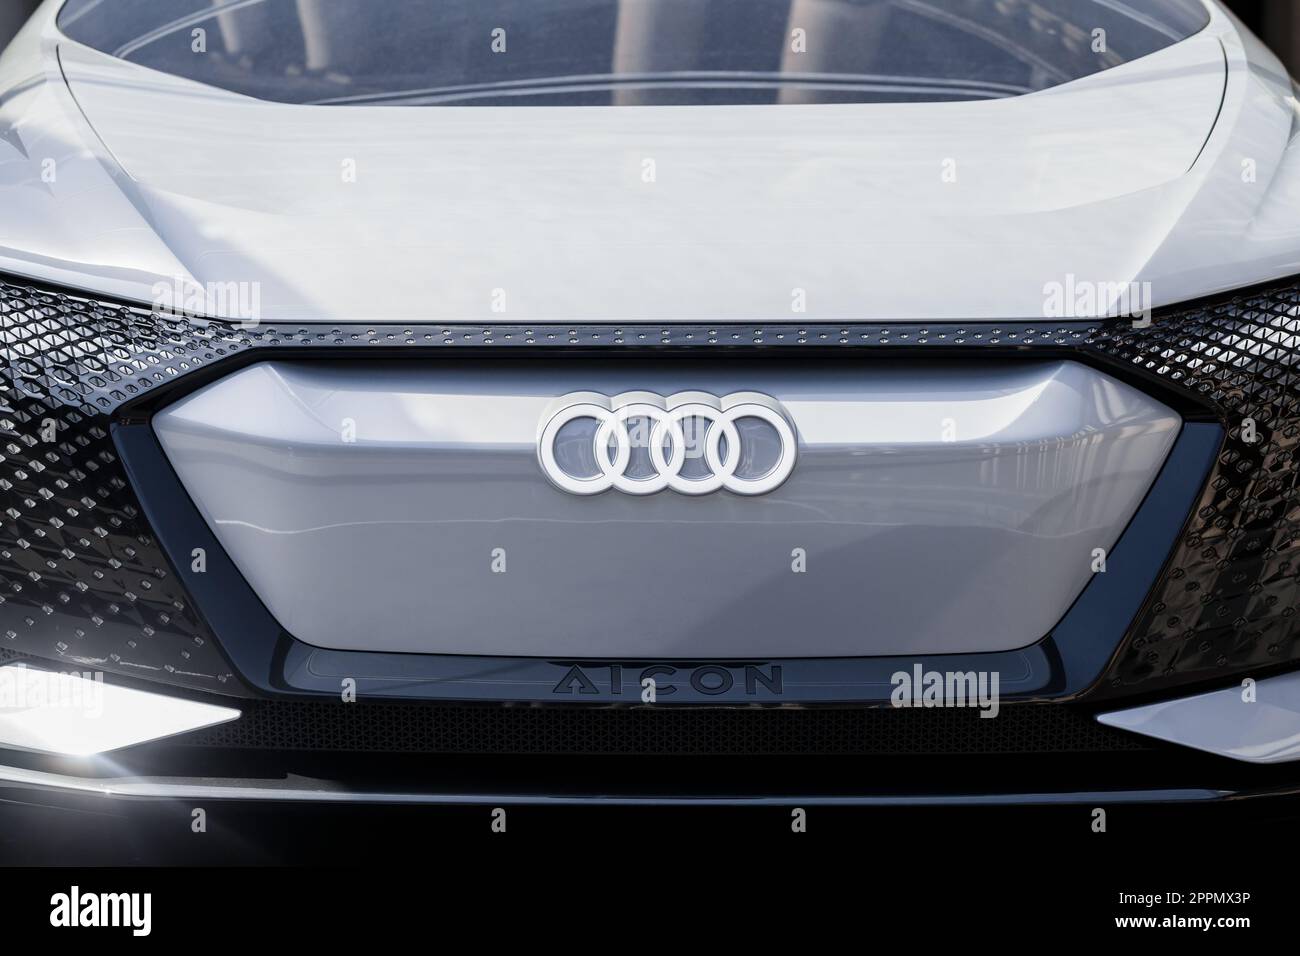 MILAN, ITALY - APRIL 16 2018: Audi city lab. Front view of a white Audi Aicon concept car, self-driving luxury sedan with electric propulsion scheme. Stock Photo